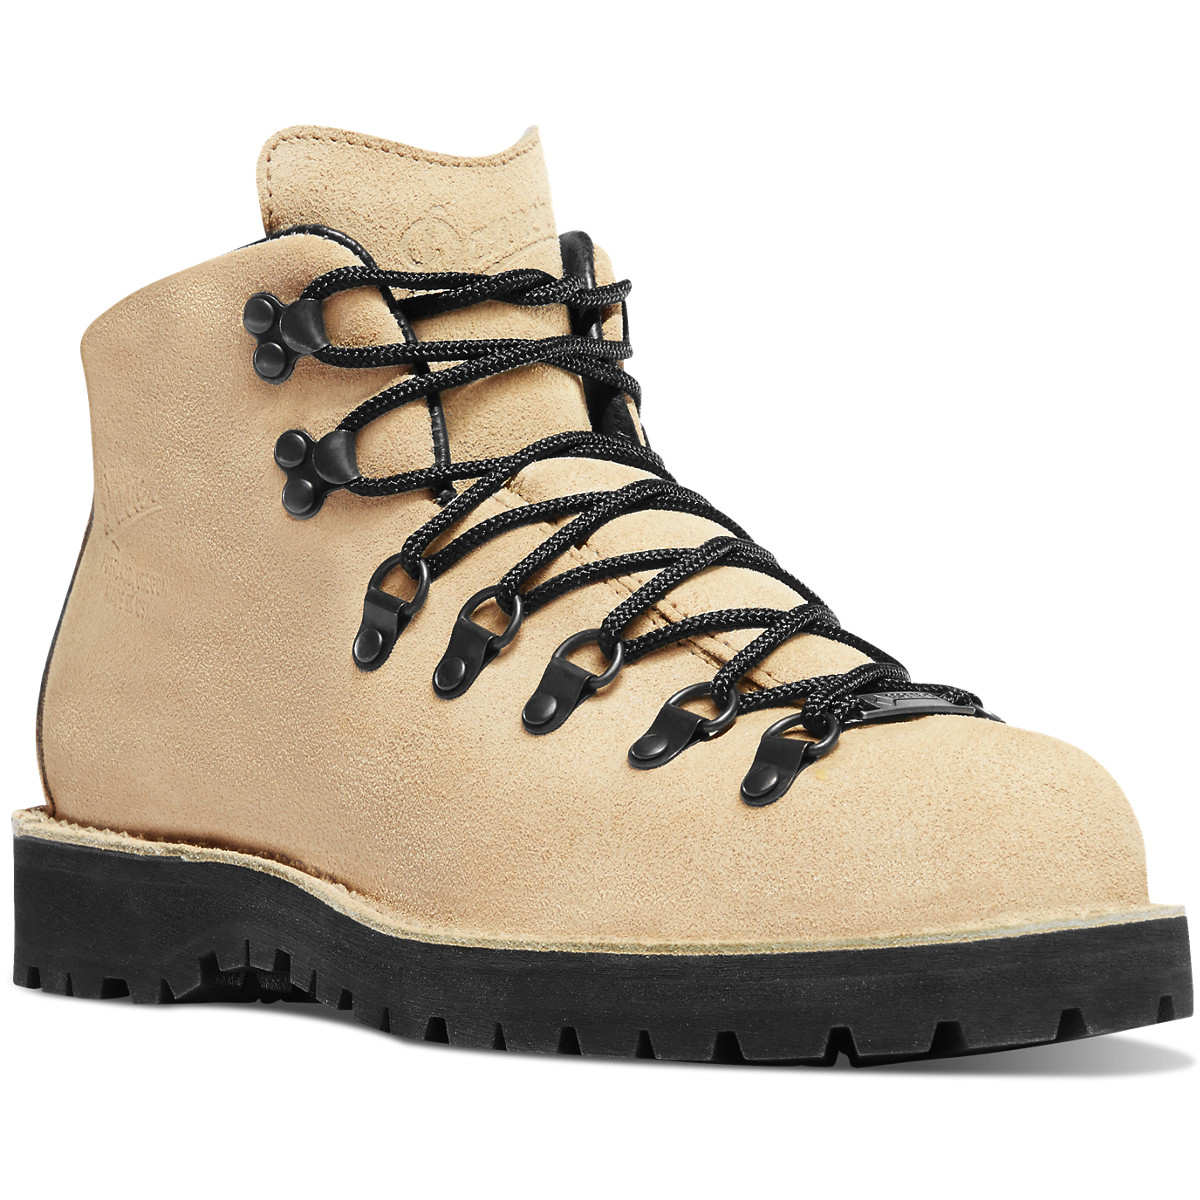 Lockhart Tactical Military And Police Discounts Up To 60 Off Danner Mountain Light Ivory